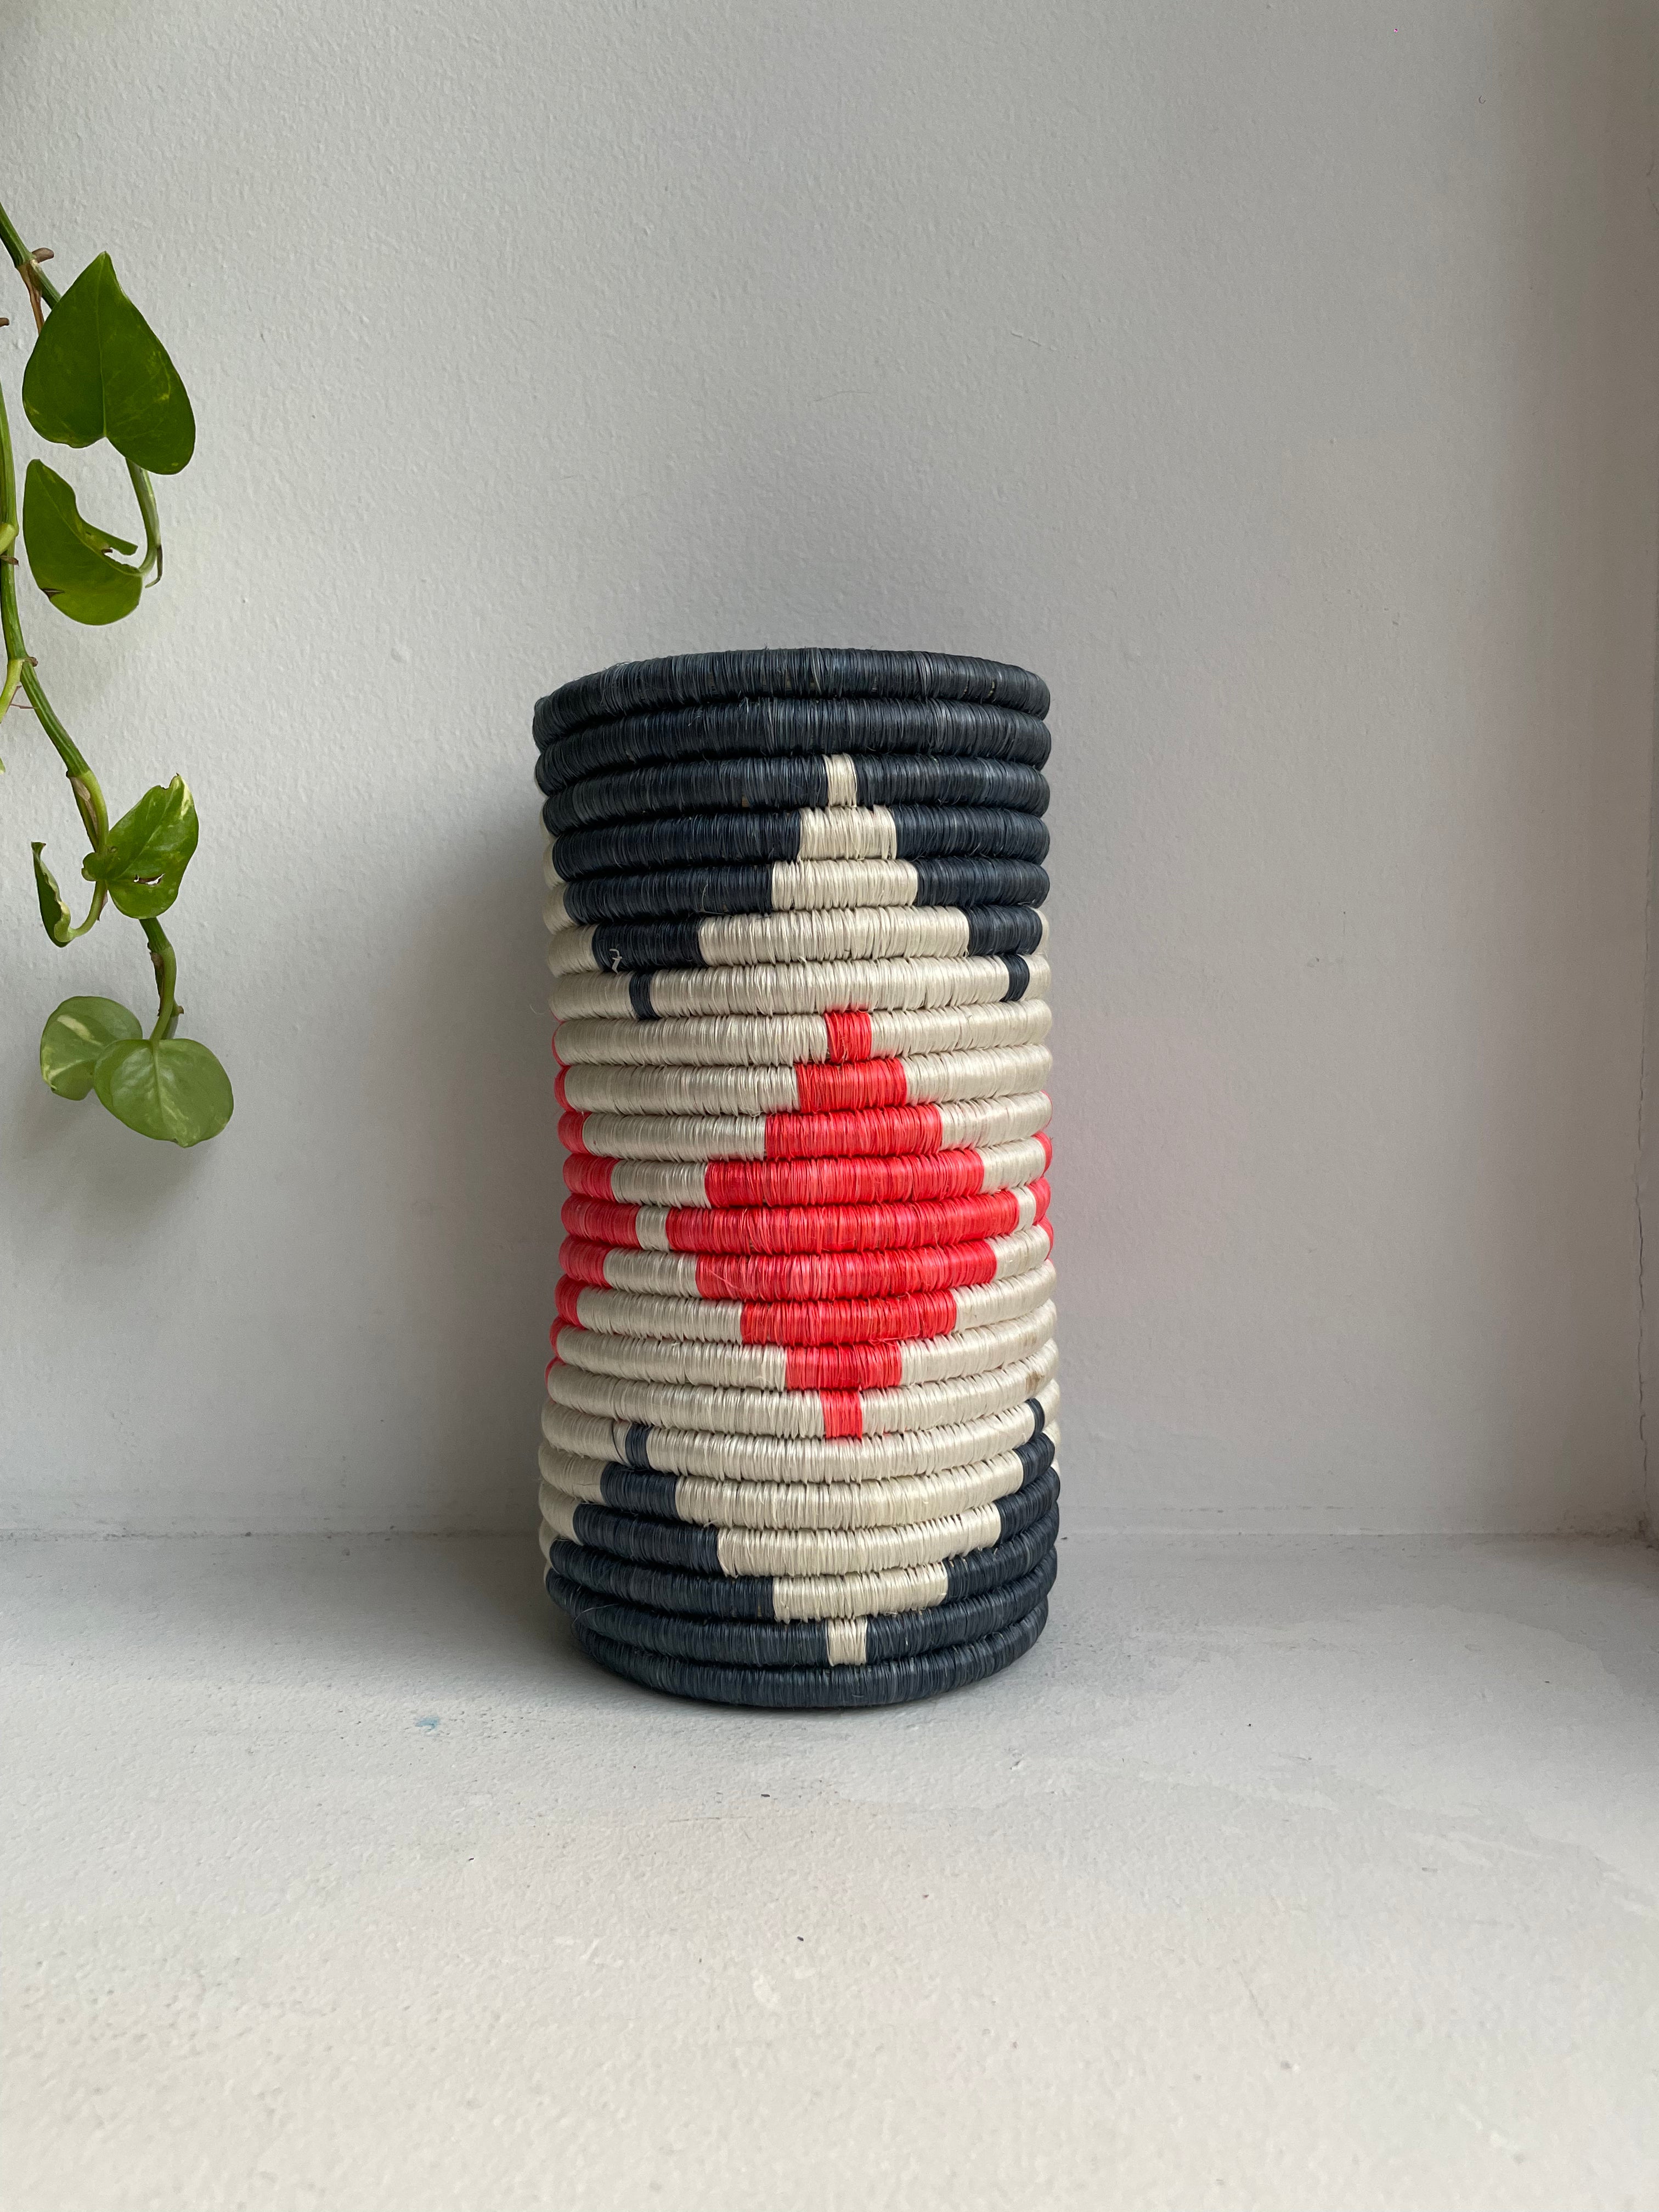 Display of hot pink, white and charcoal colored vase